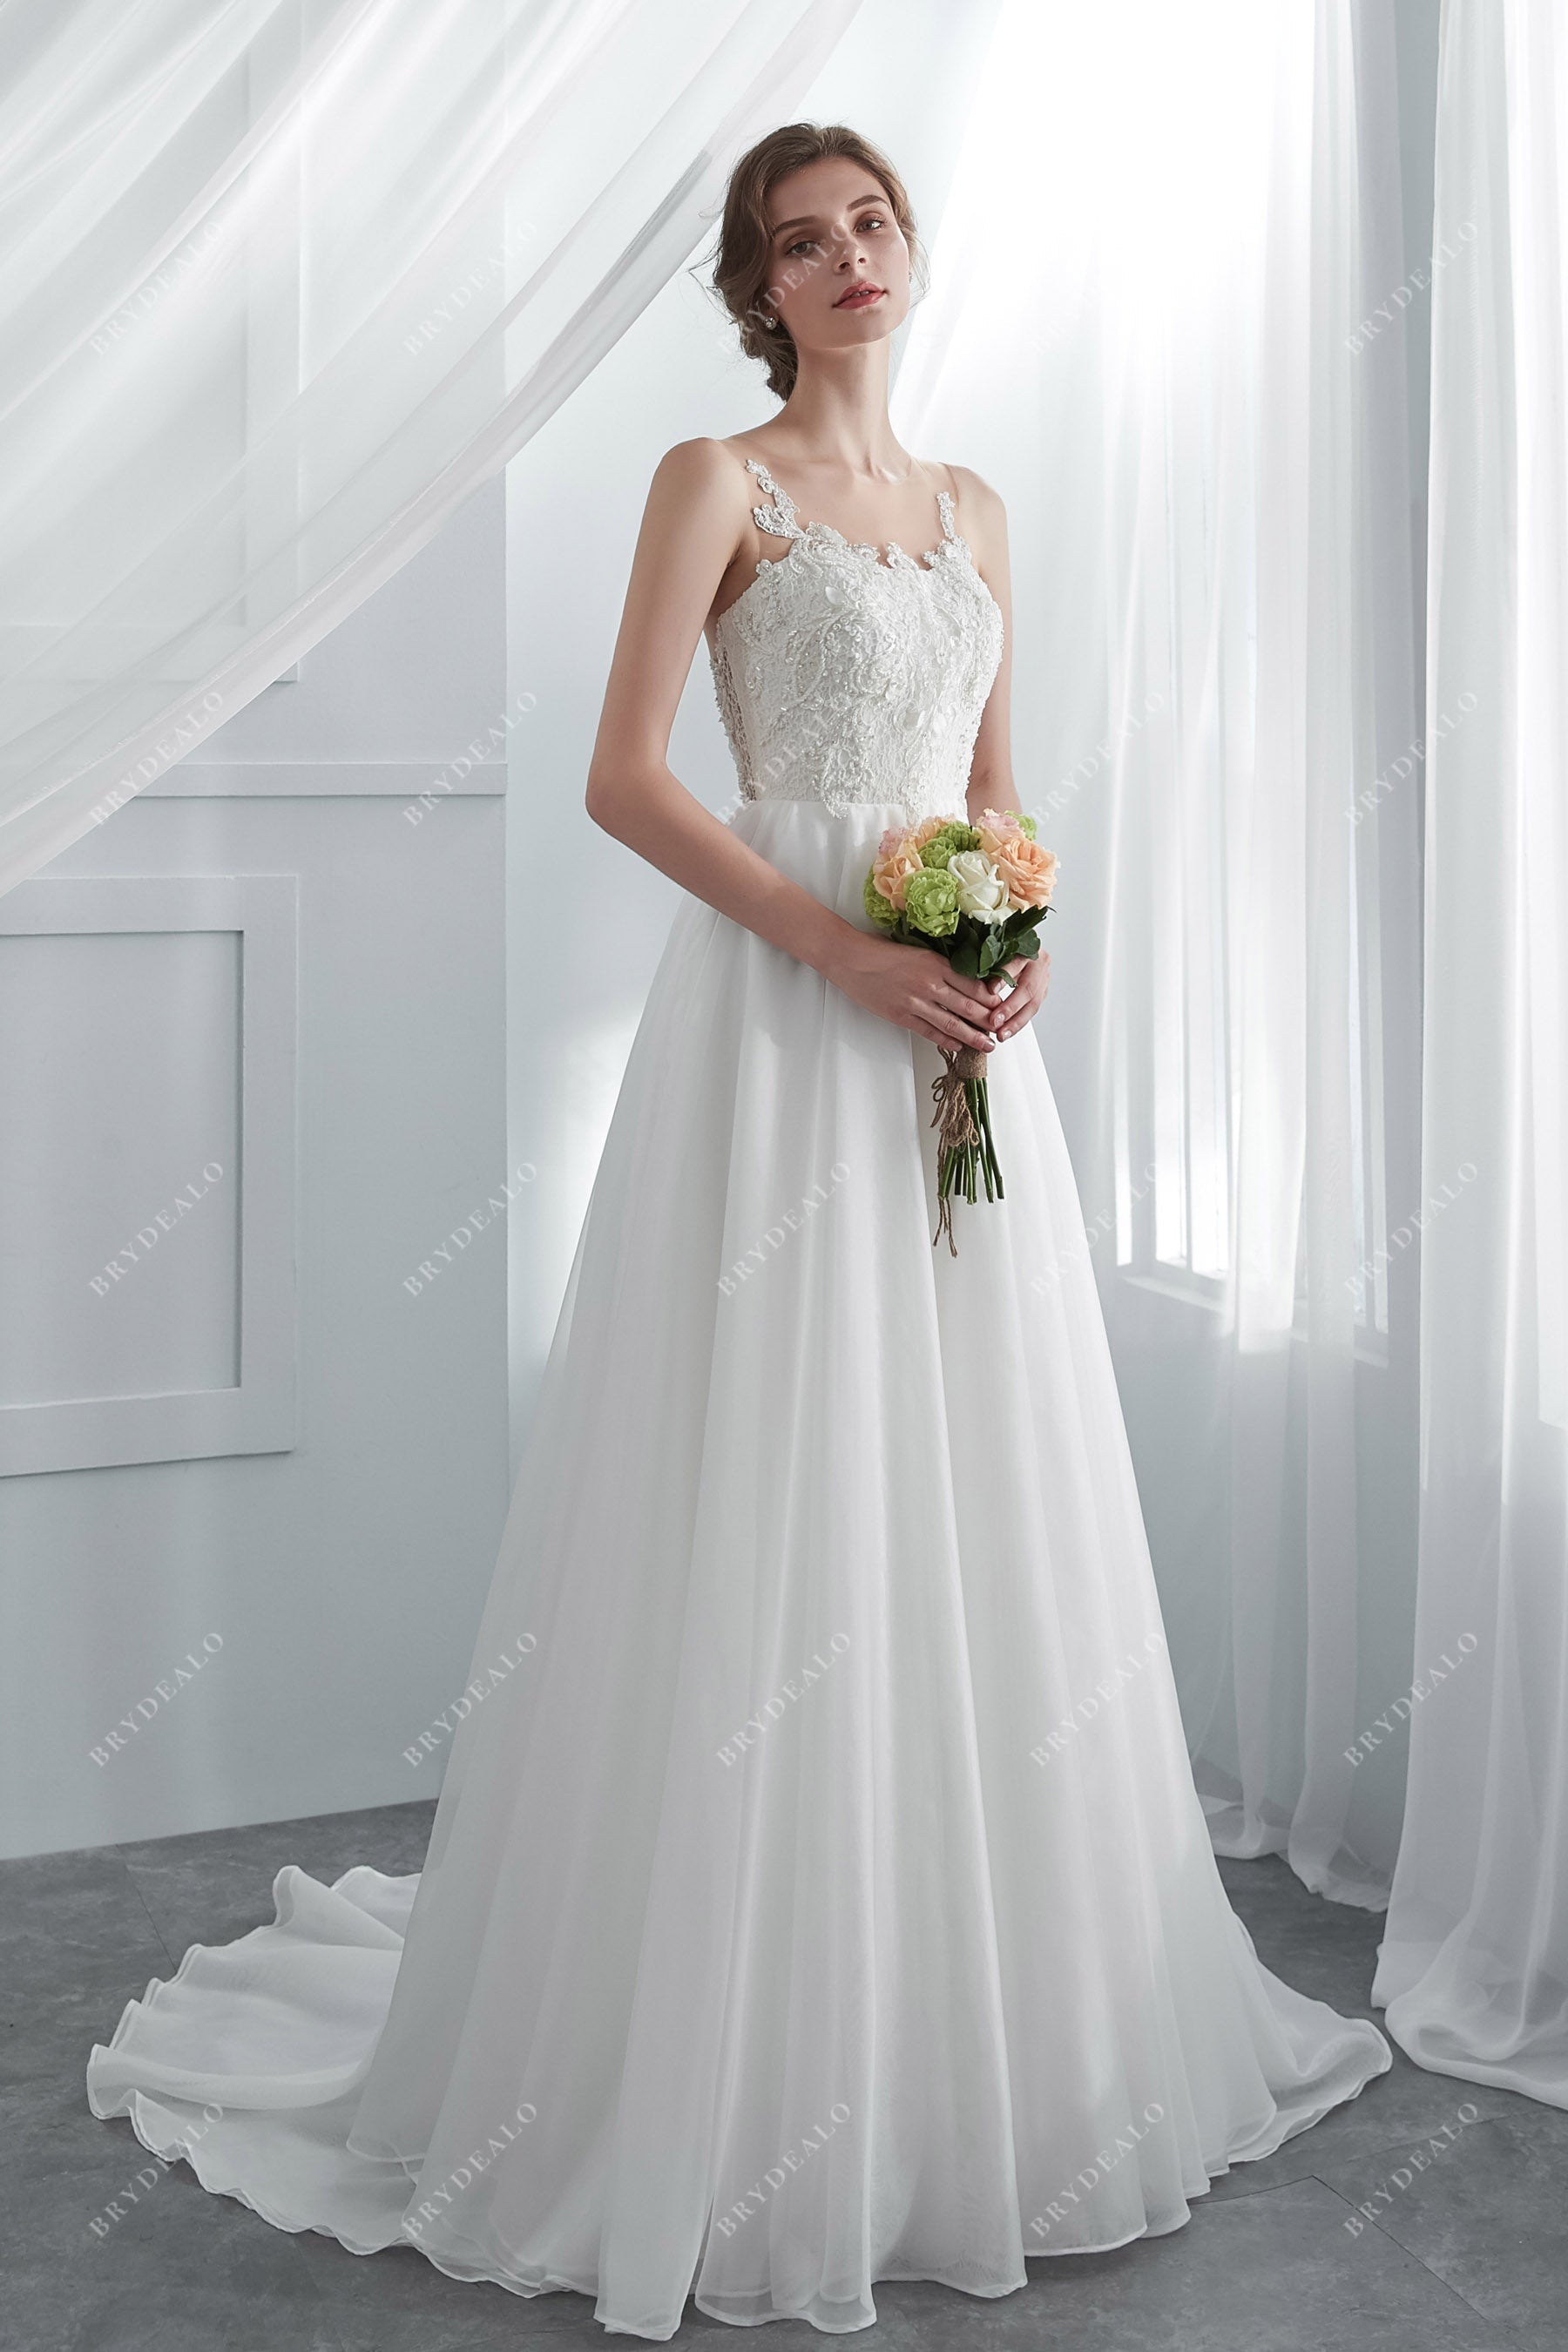 Sample Sale | Designer Beaded Floral Lace Organza Bridal Gown